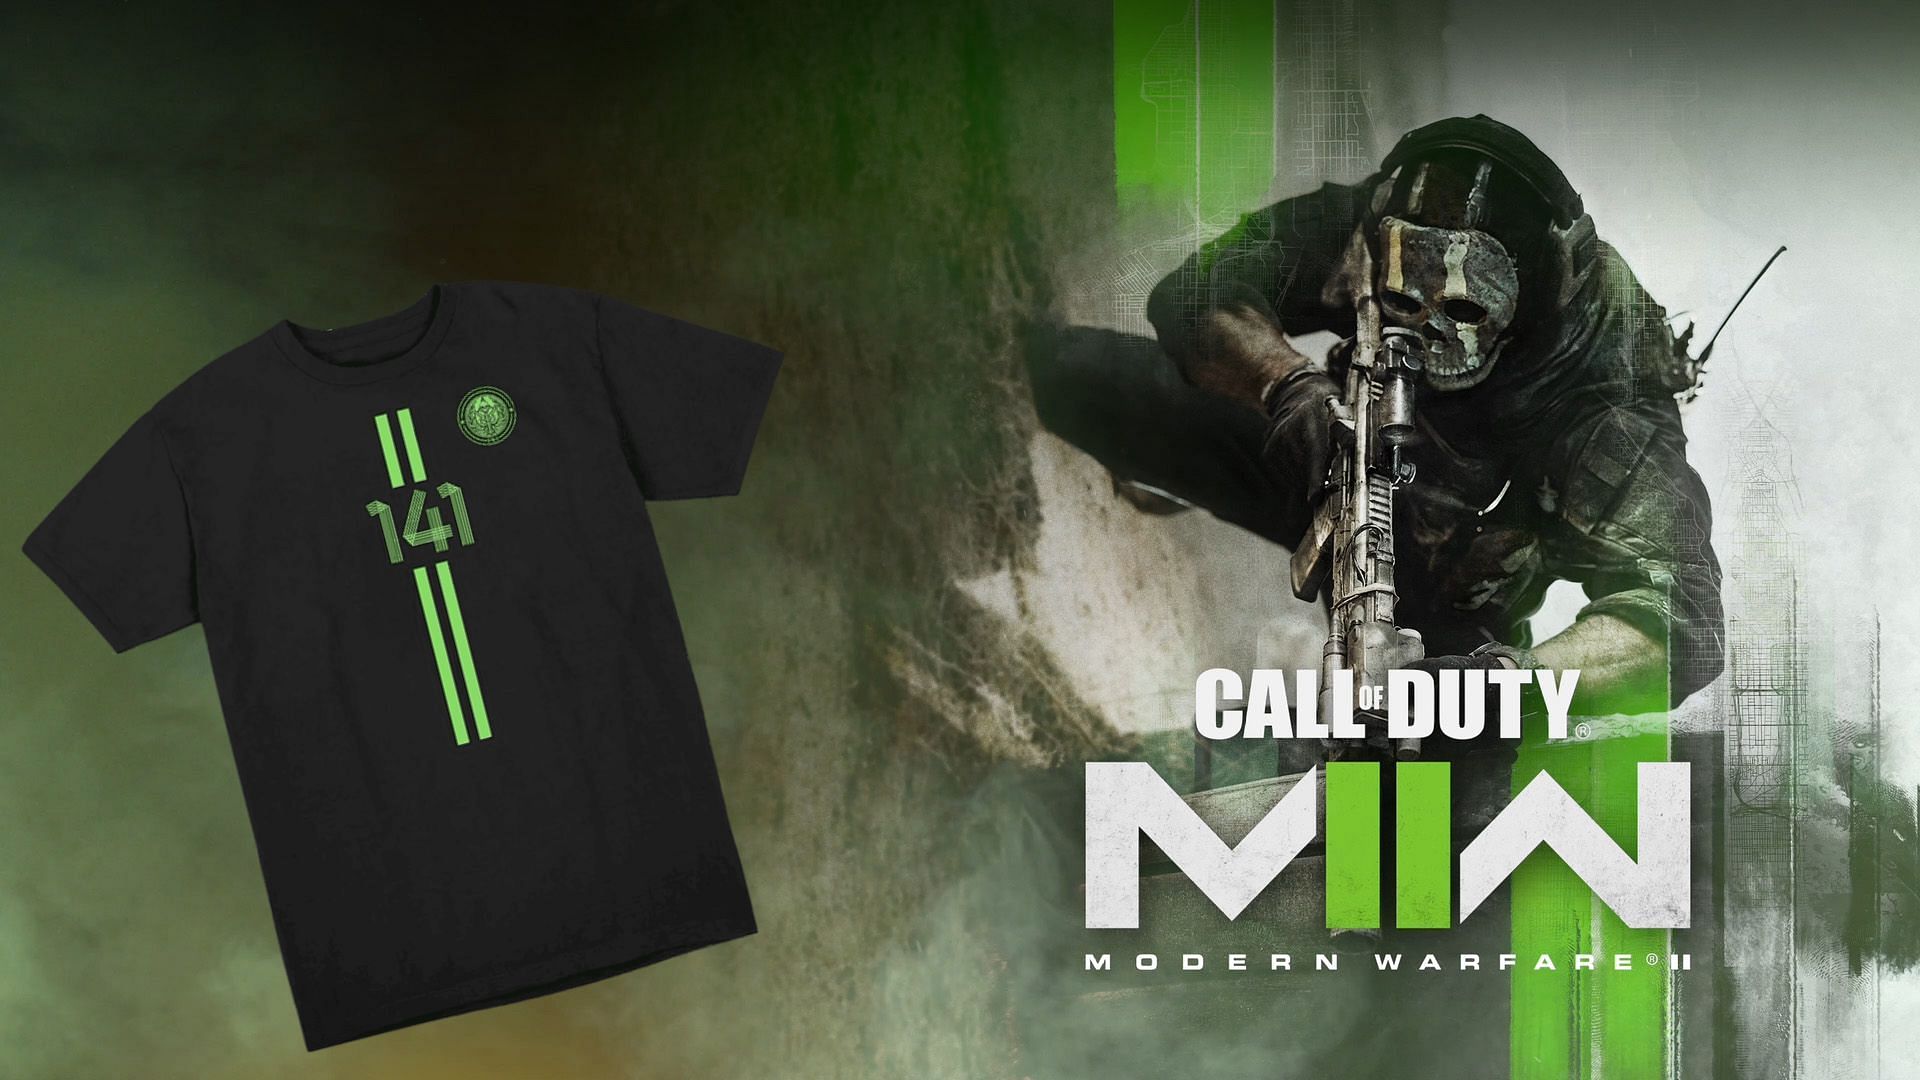 How to win Modern Warfare 2's Task Force 141 shirt for free?